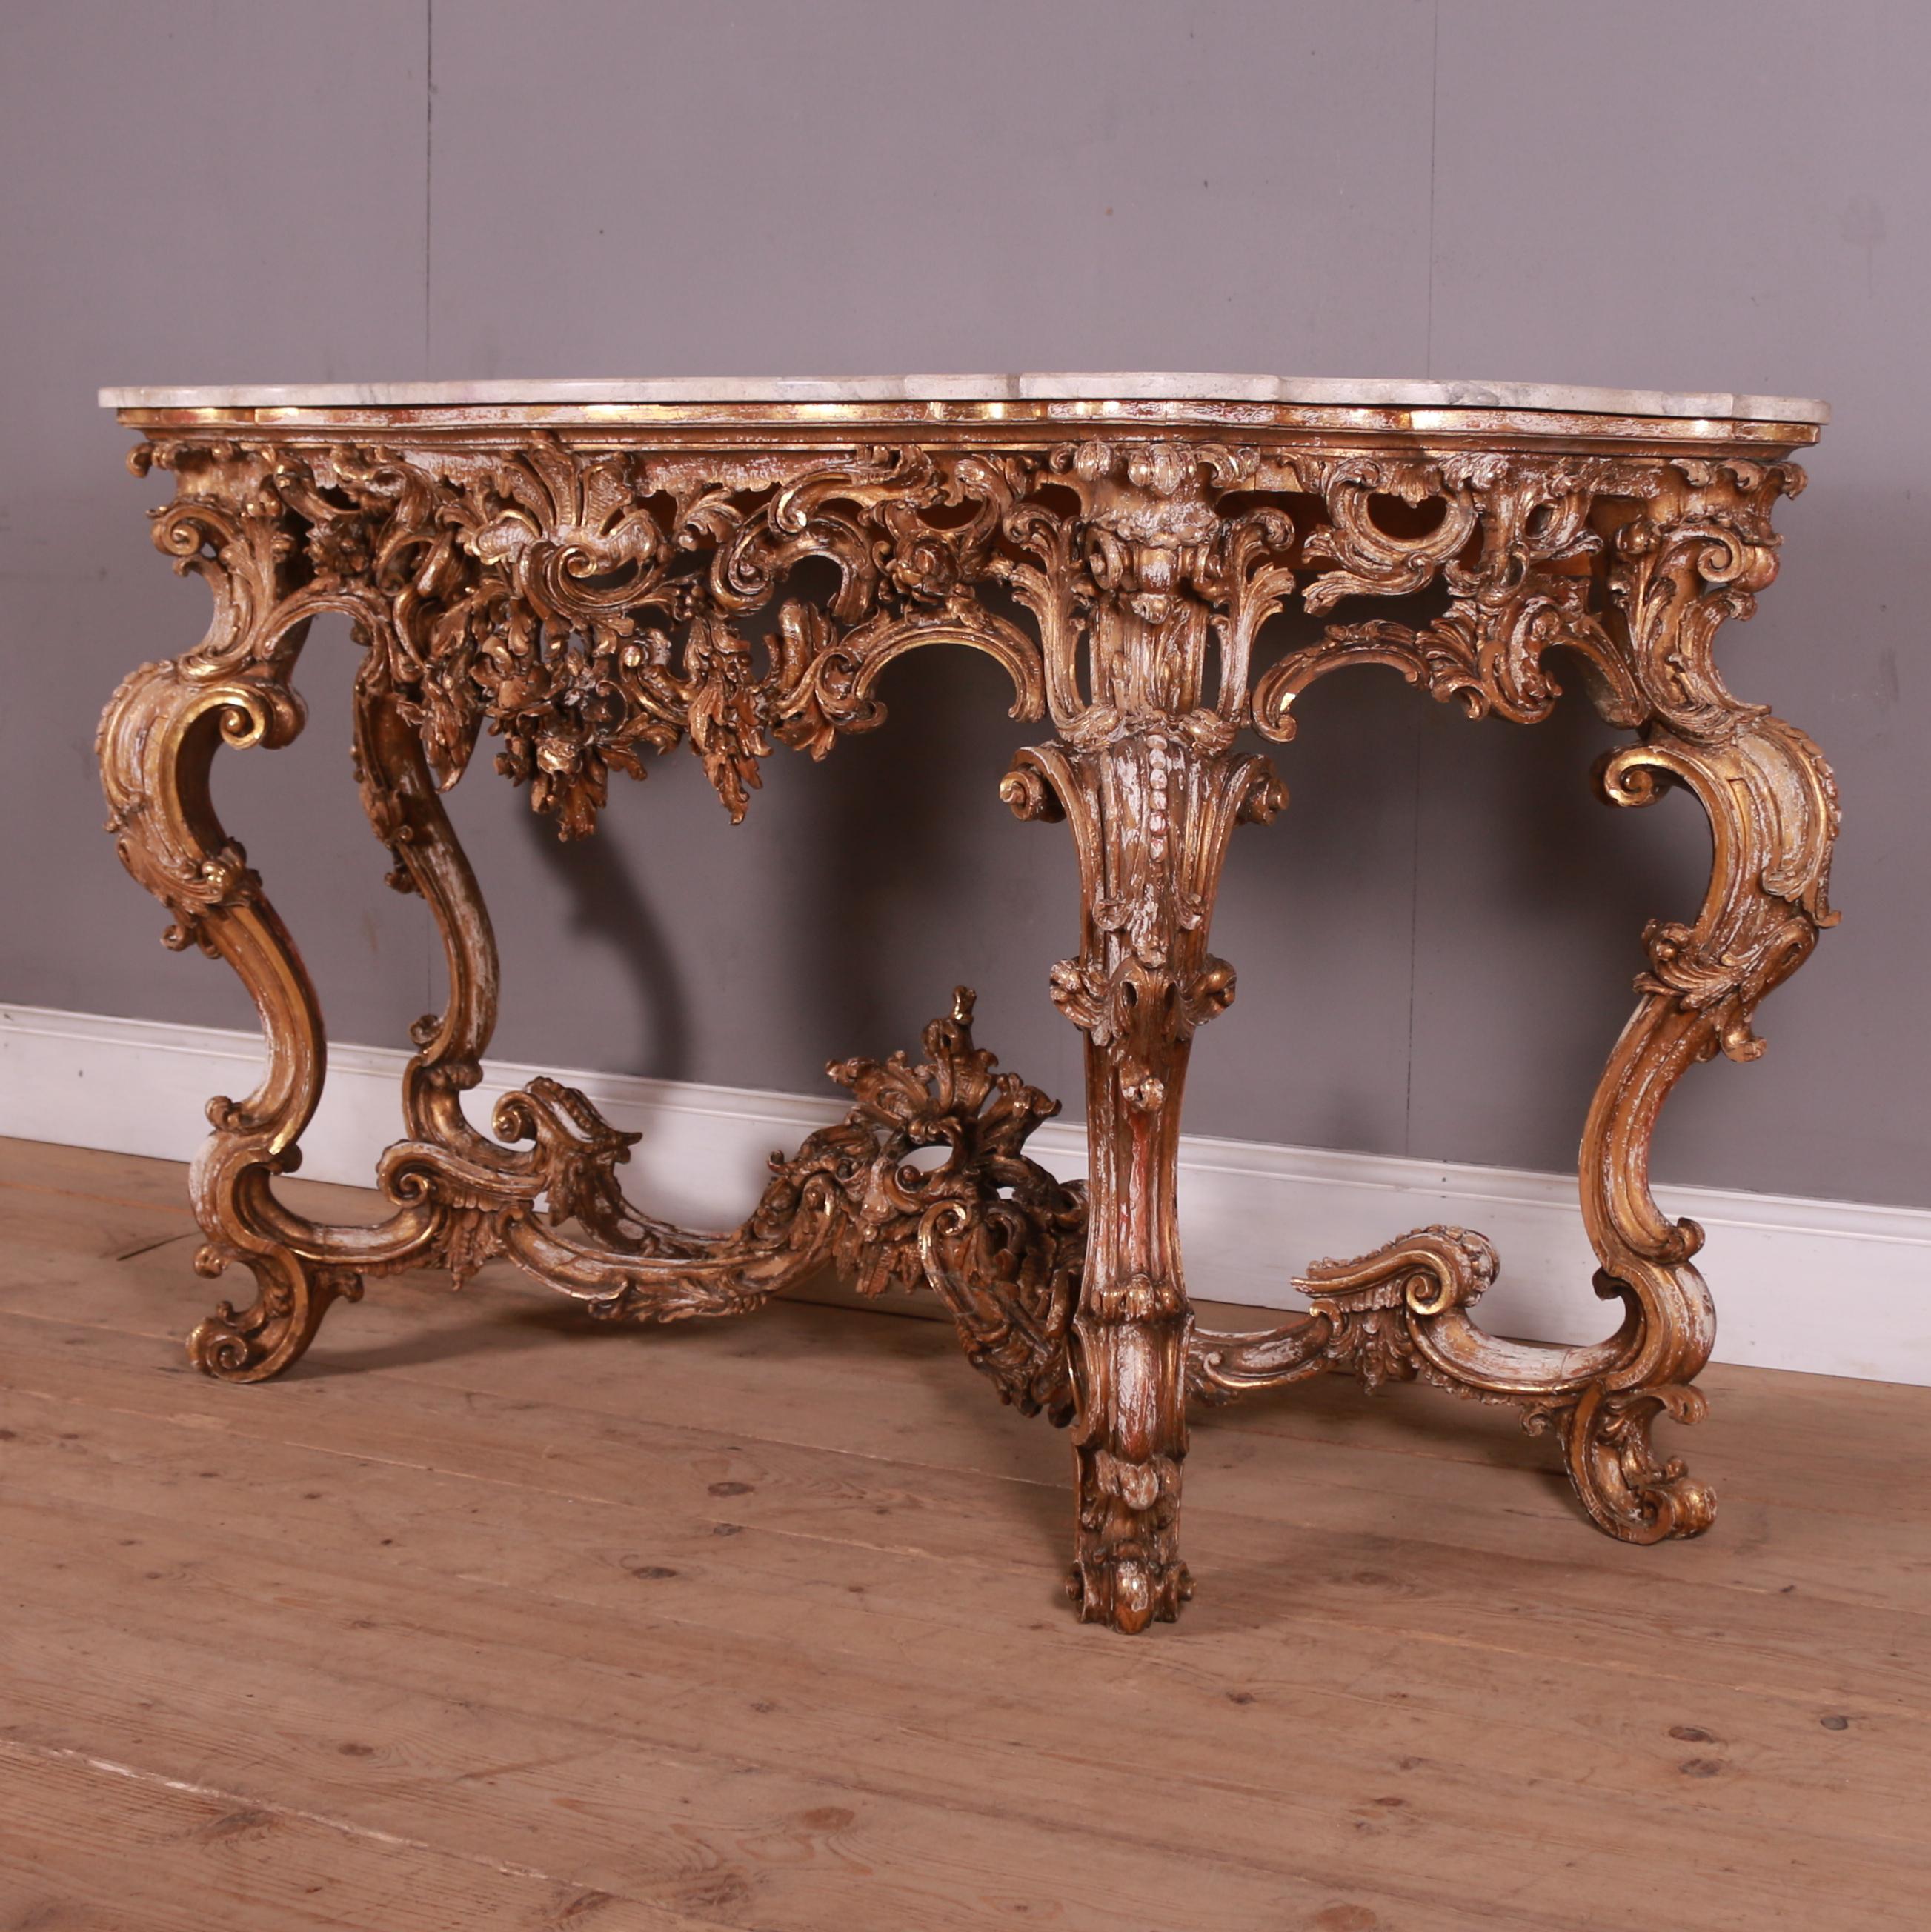 Early 20th C Italian carved giltwood console table with faux marble top. 1920.

Reference: 7377

Dimensions
68.5 inches (174 cms) Wide
24 inches (61 cms) Deep
37 inches (94 cms) High.